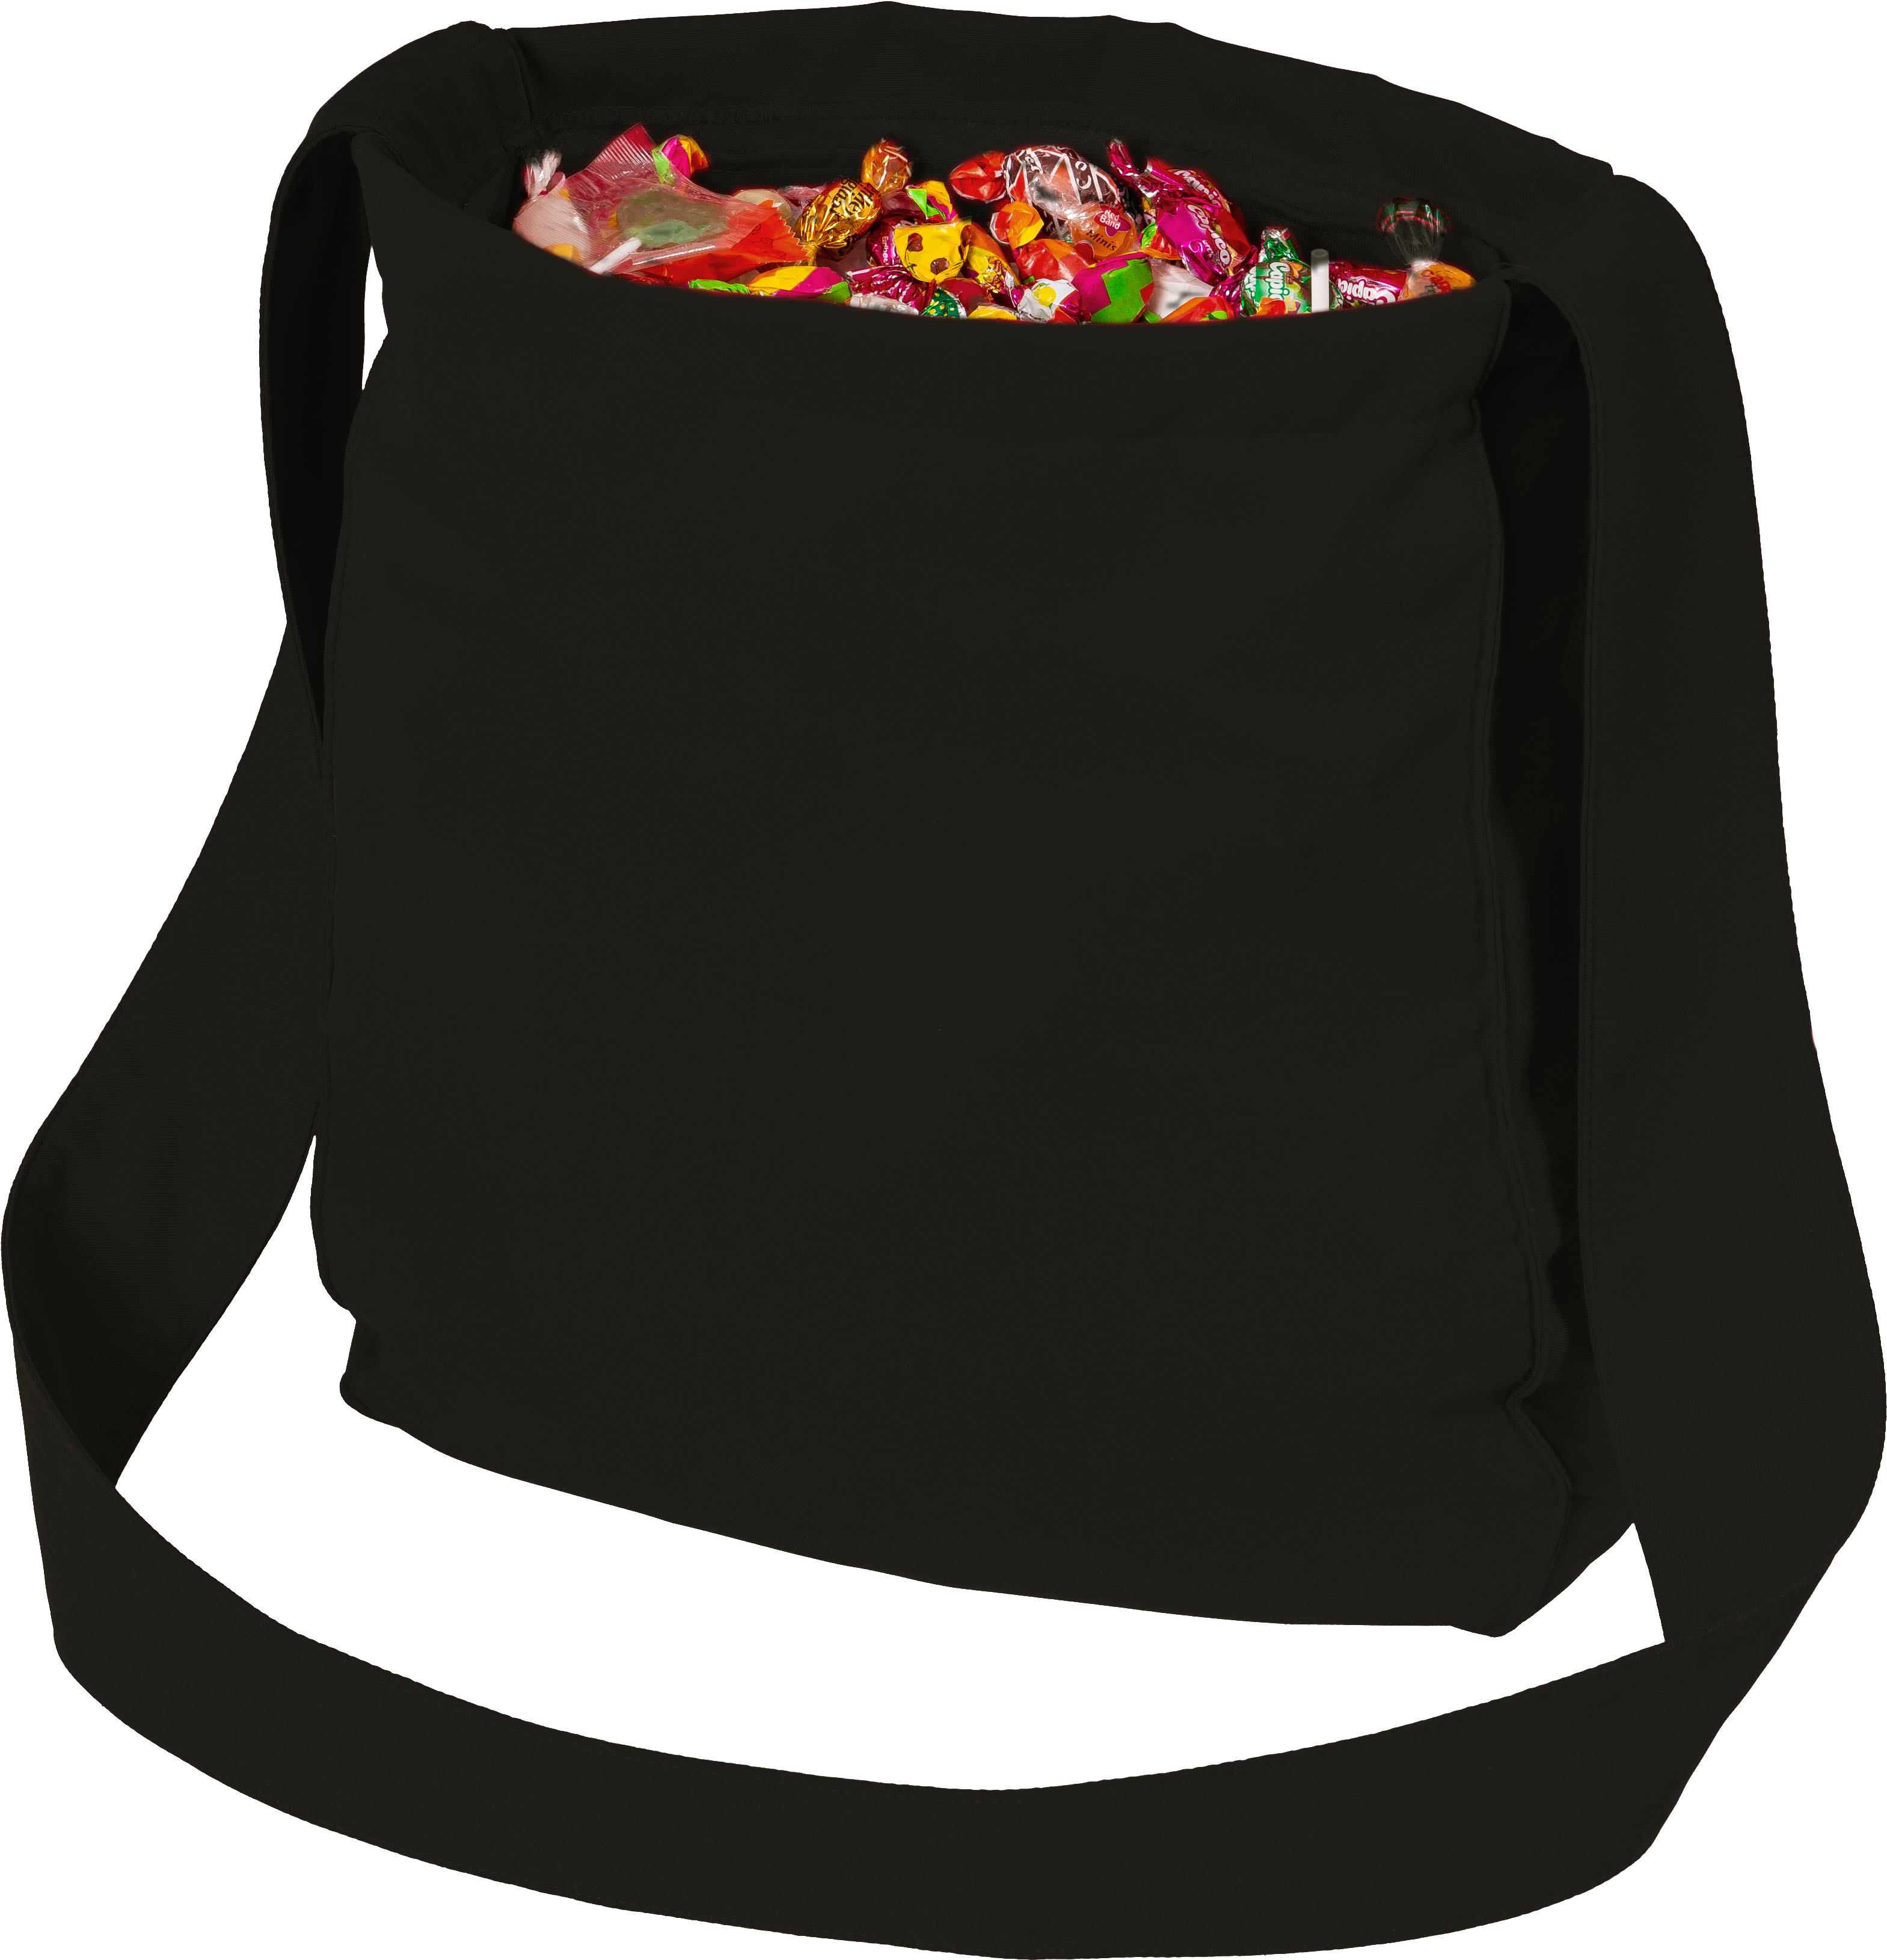 Throwing bag, black (with lining)